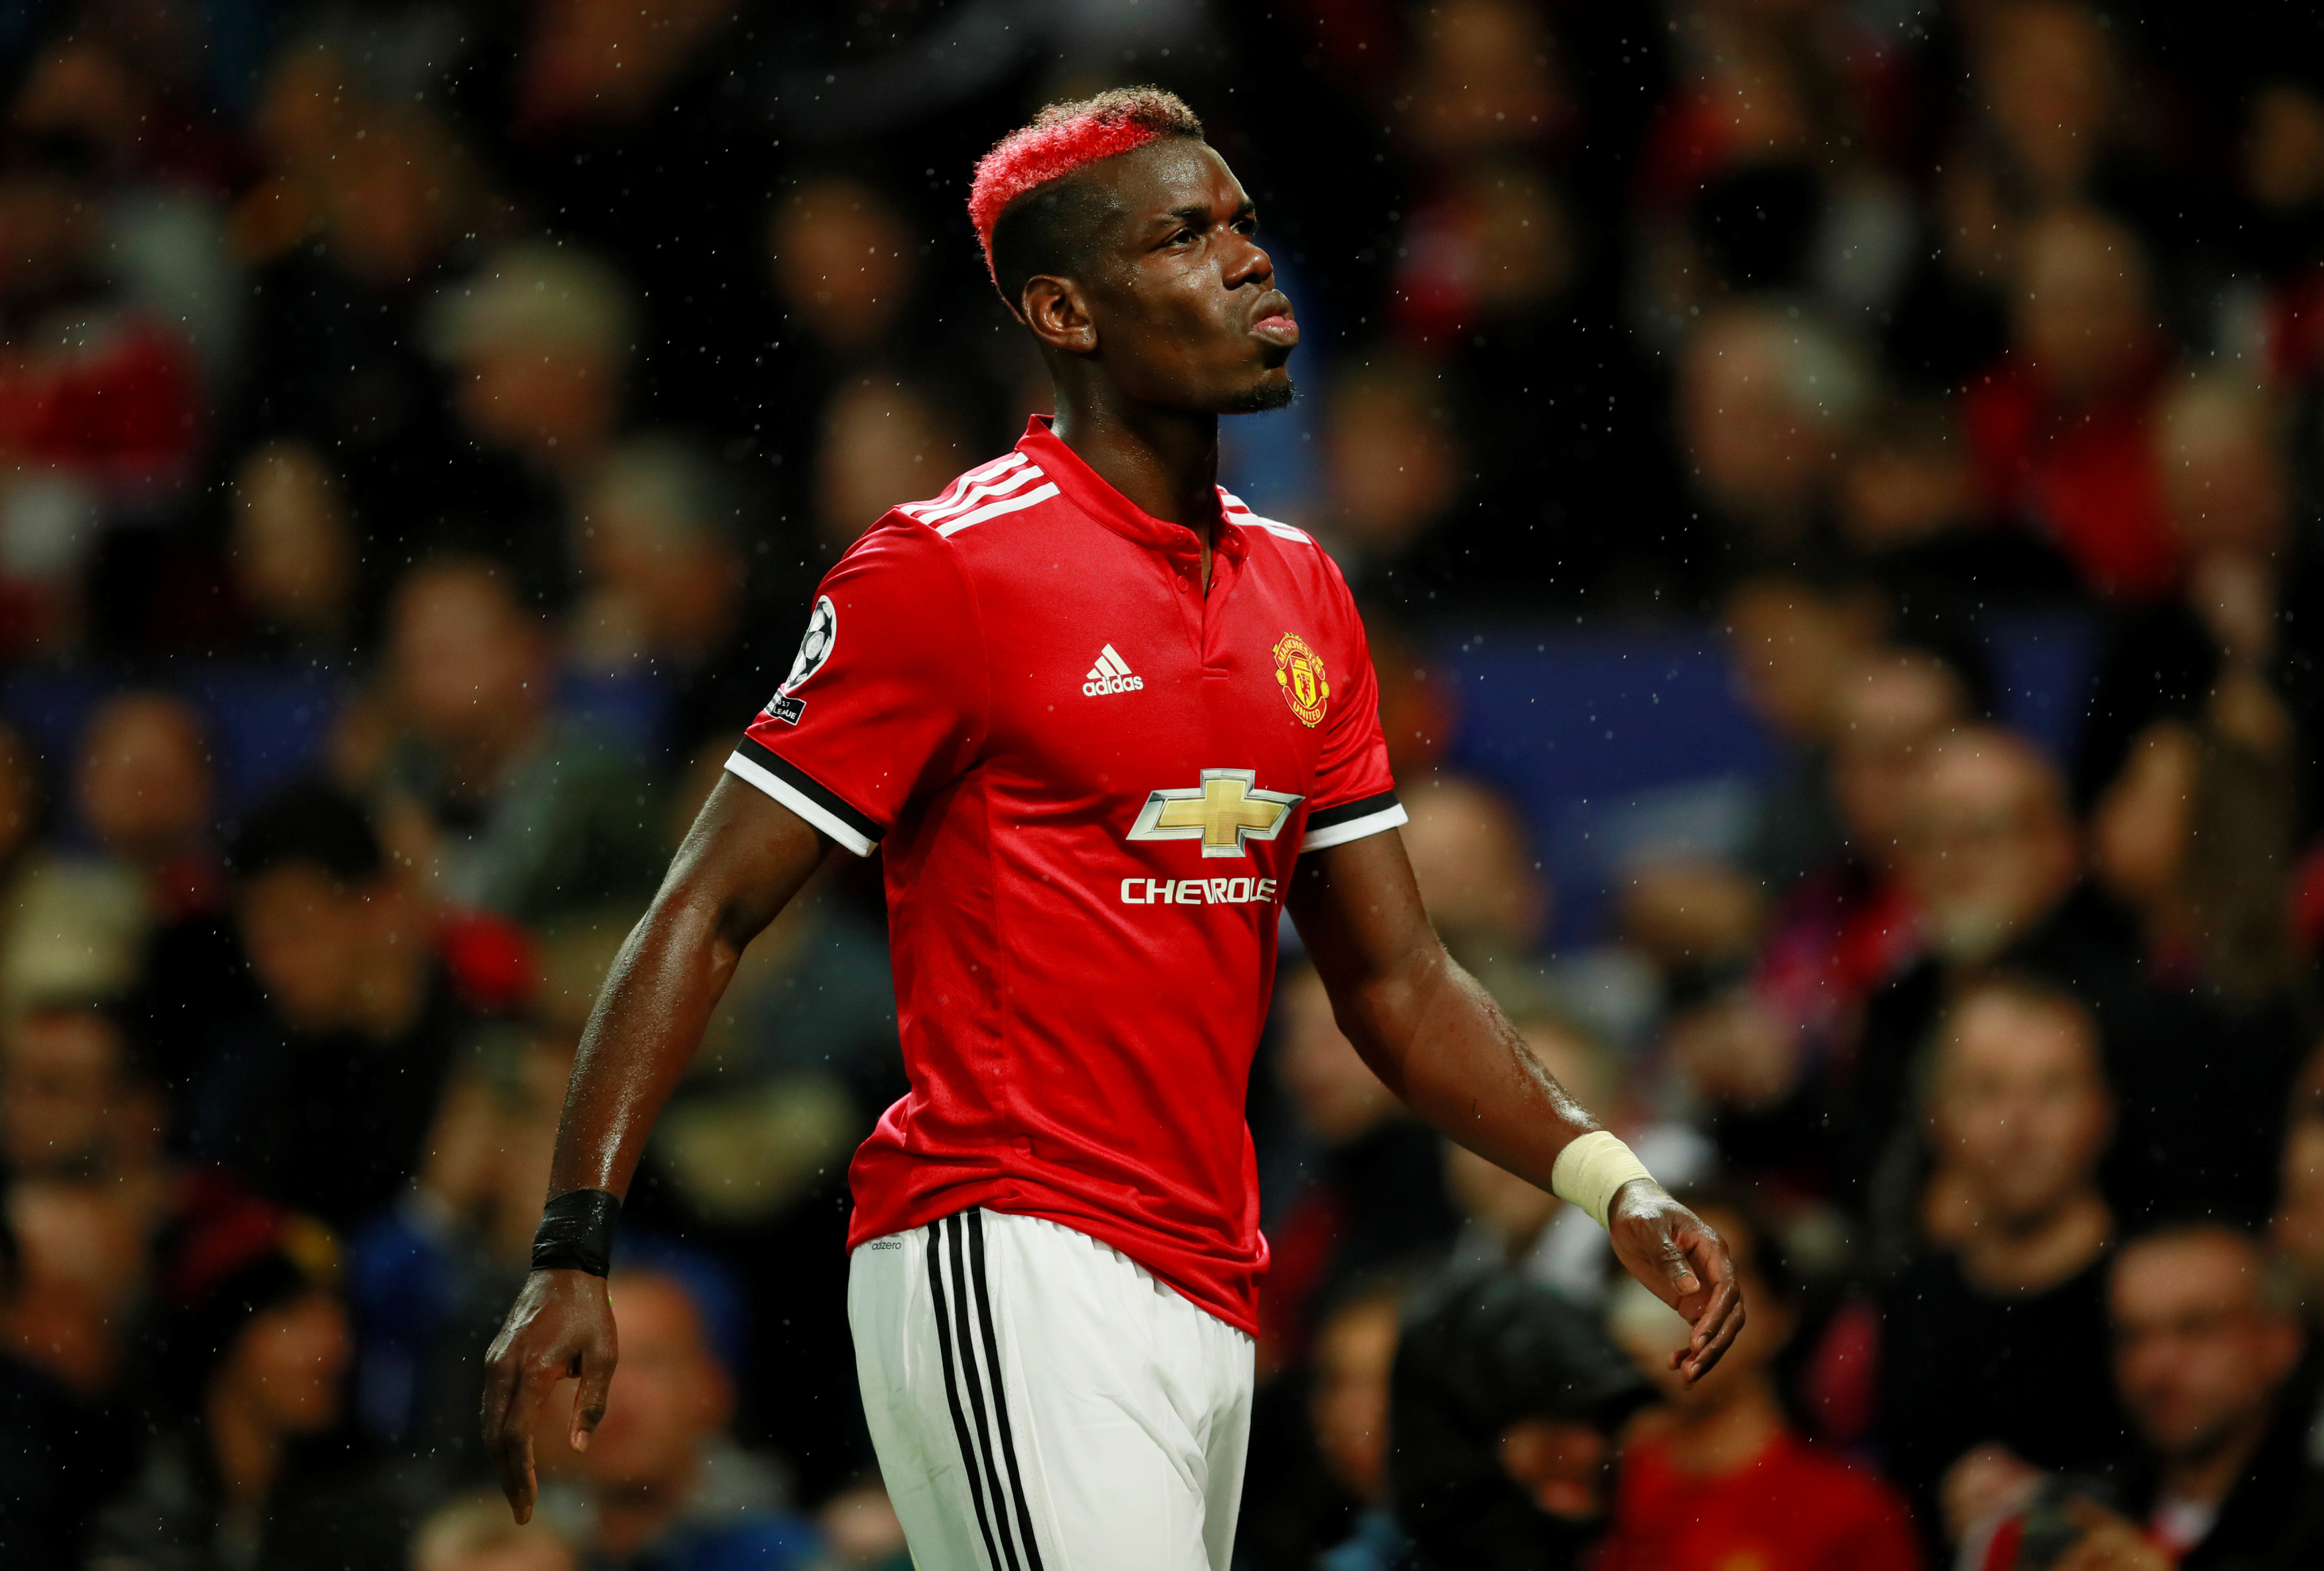 Football: Manchester United's Paul Pogba faces spell on the sidelines with hamstring injury